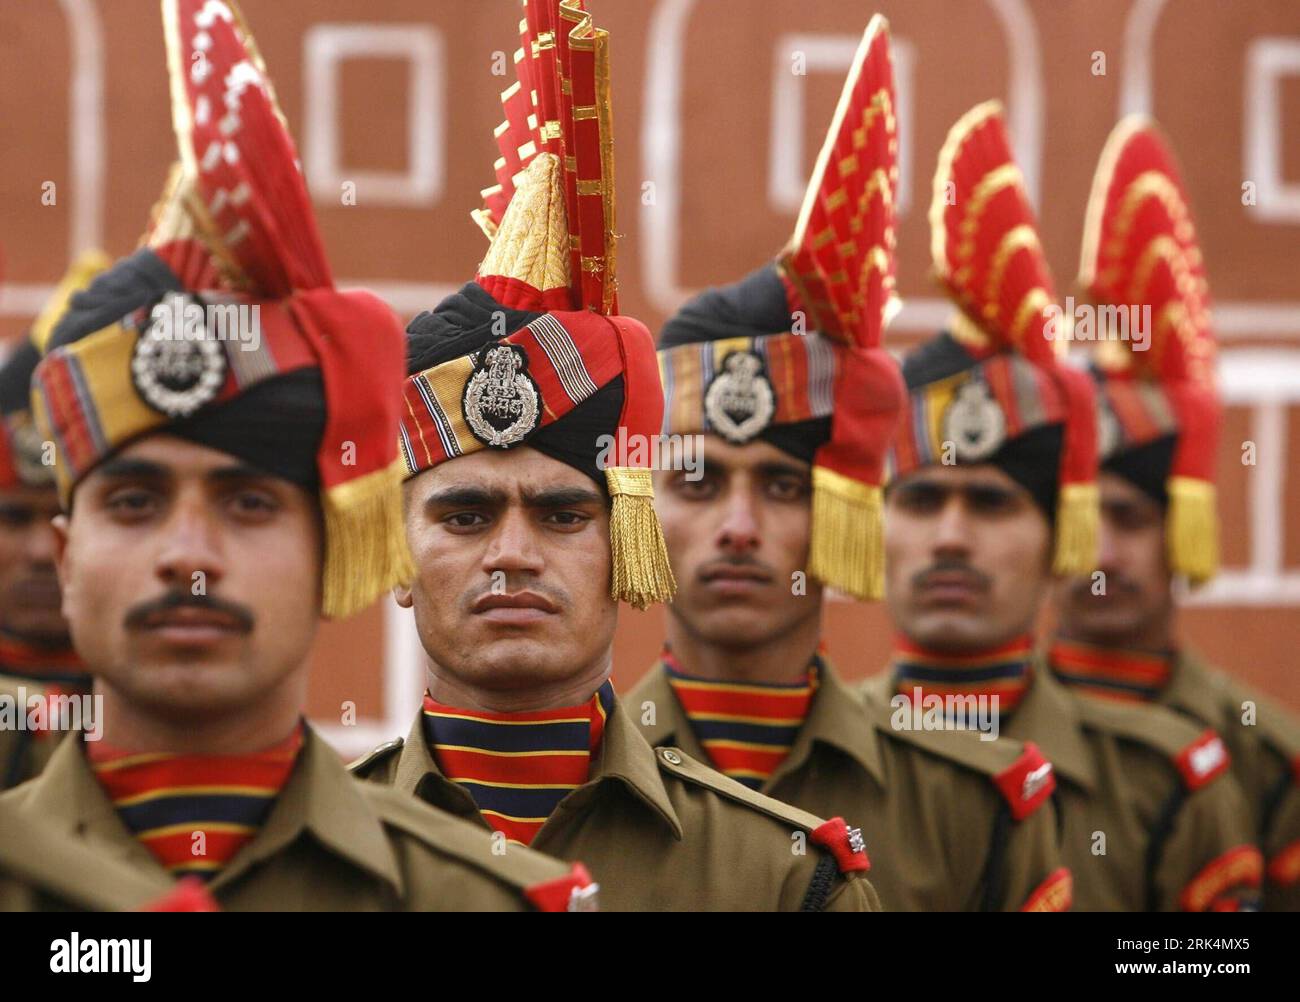 Bildnummer: 53648909  Datum: 06.12.2009  Copyright: imago/Xinhua Indian Border Security Force (BSF) soldiers take part in their passing out parade in Humhama, on the outskirts of Srinagar, the summer capital of India-controlled Kashmir, Dec. 6, 2009. A total of 665 recruits were formally inducted into the BSF, an Indian paramilitary force, after completing 36 weeks of rigorous training in physical fitness, weapon handling and counter insurgency, a BSF spokesman said. (Xinhua/Javed Dar)(zl) (1)INDIA-KASHMIR-BSF-PARADE PUBLICATIONxNOTxINxCHN Staat Militär kbdig xmk 2009 quer o00 Militärparade, S Stock Photo